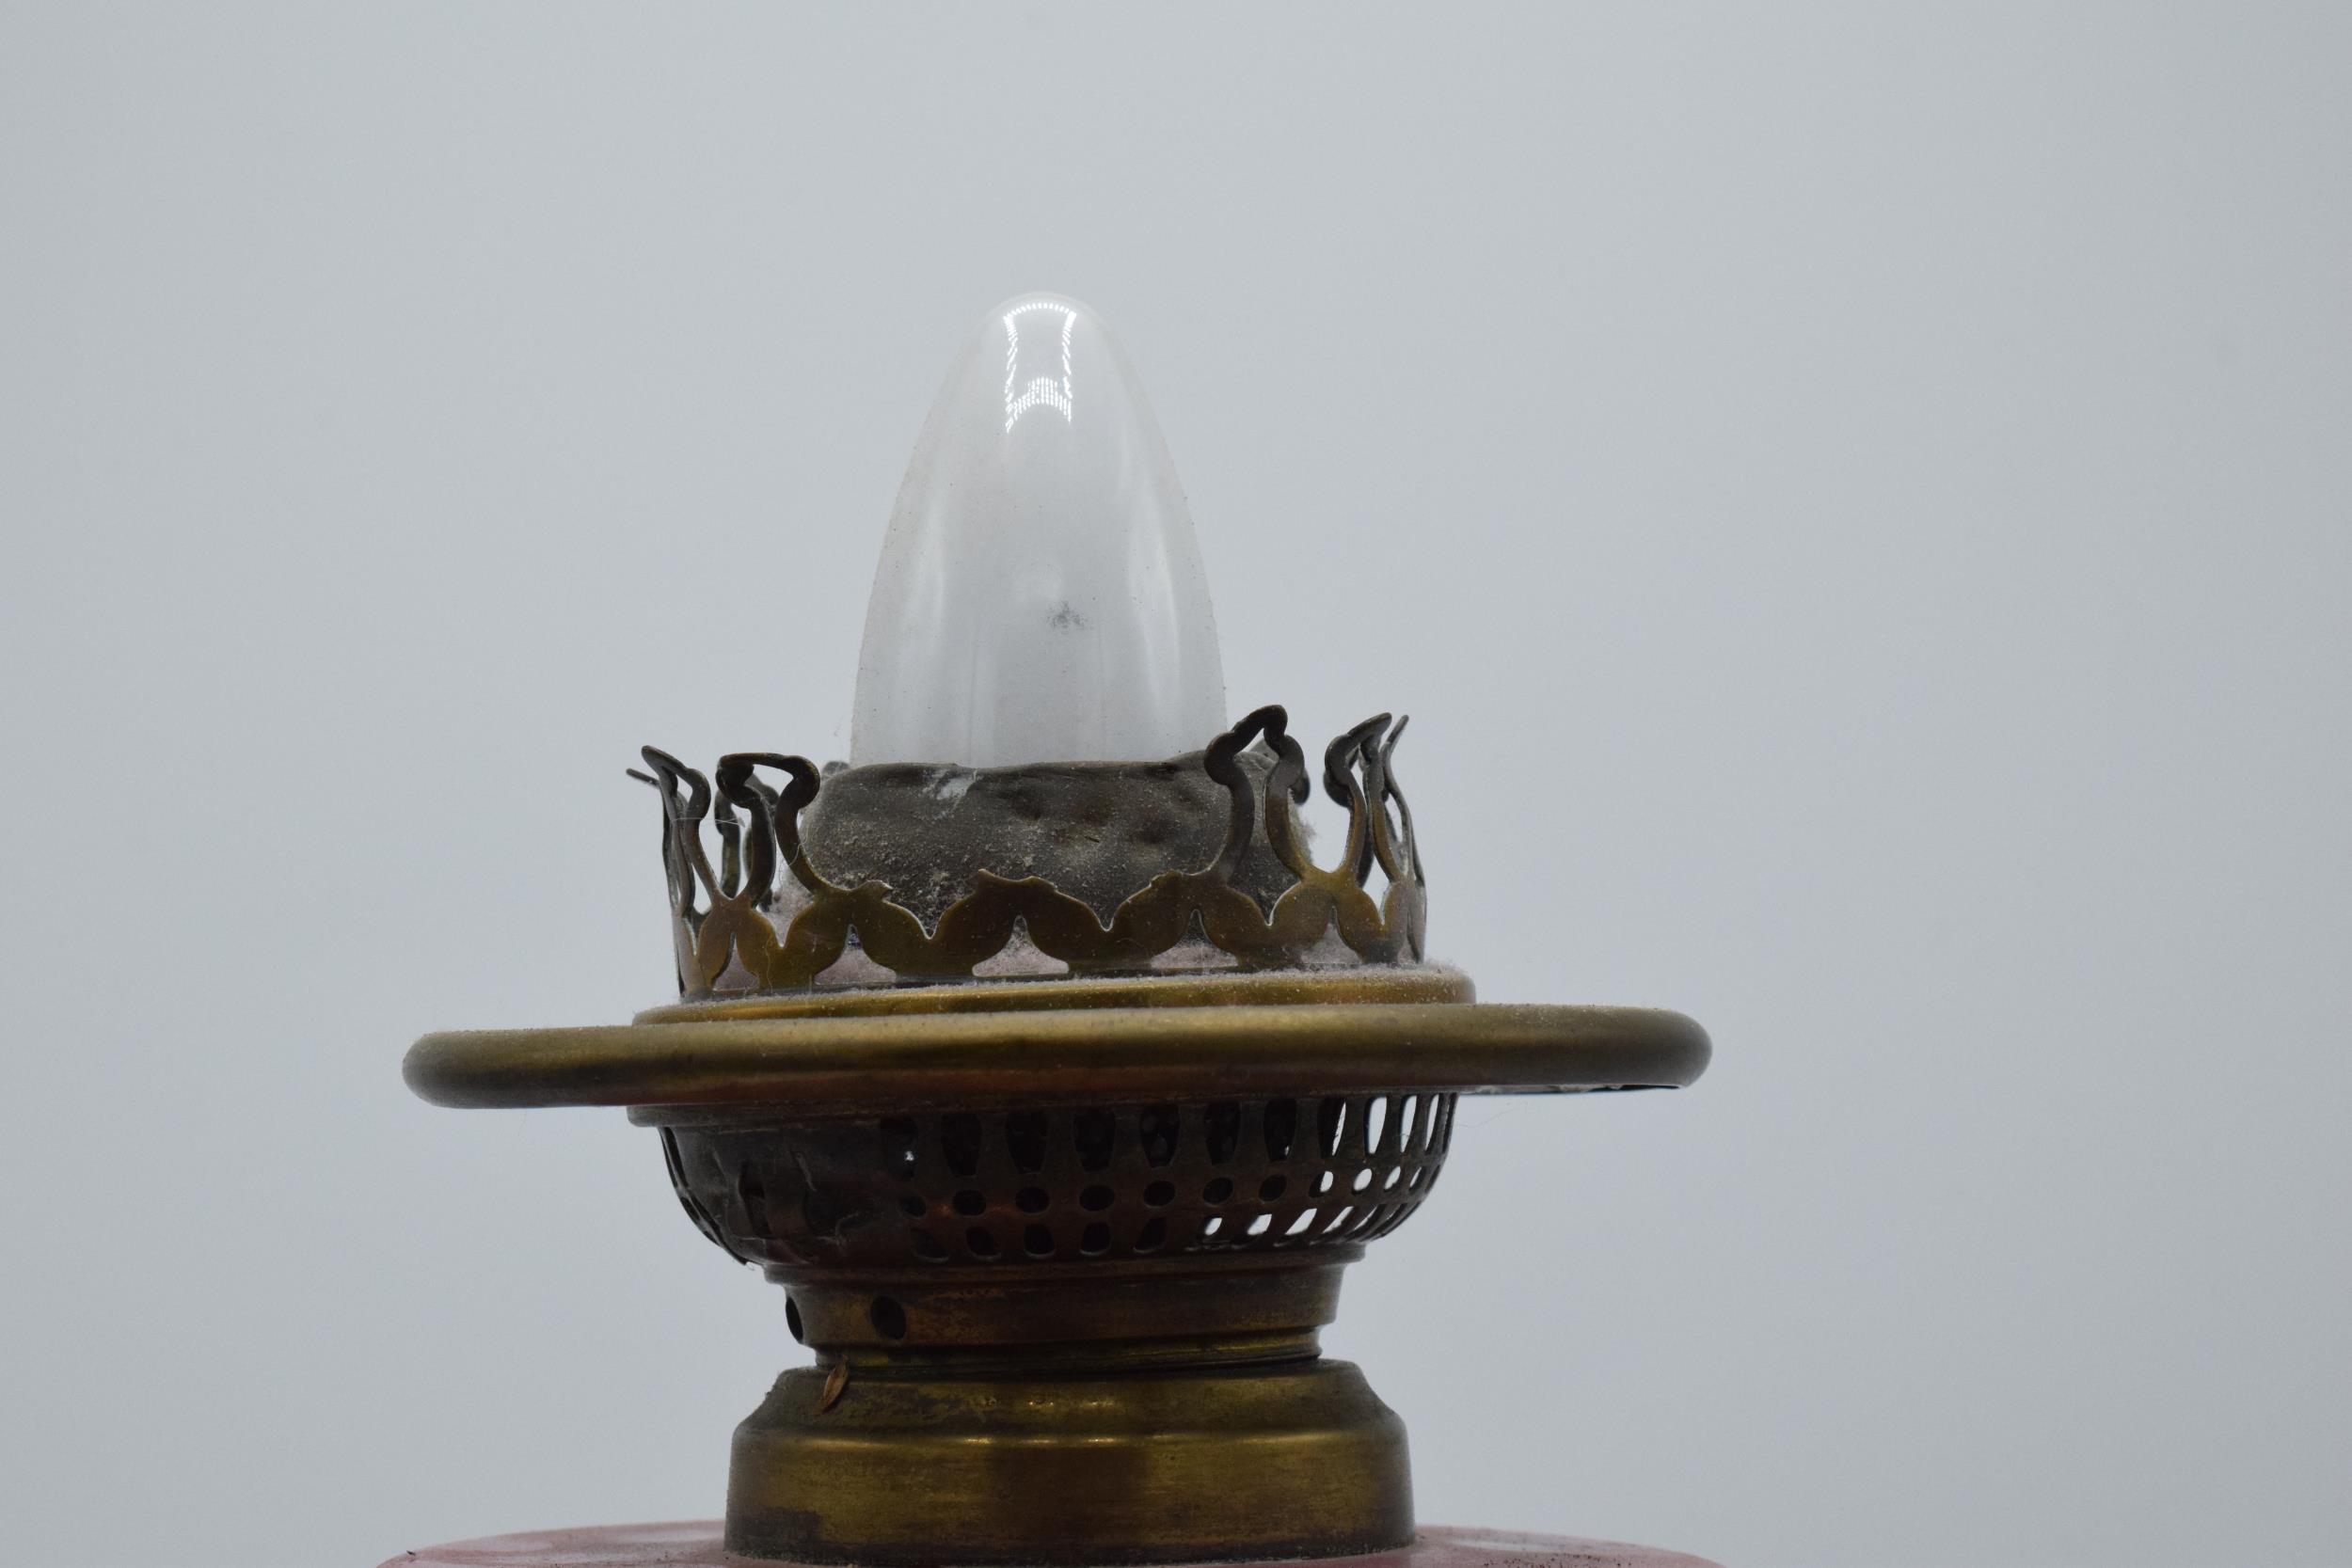 Late 19th century / early 20th century brass oil lamp with pink glass converted into electric - Image 6 of 6